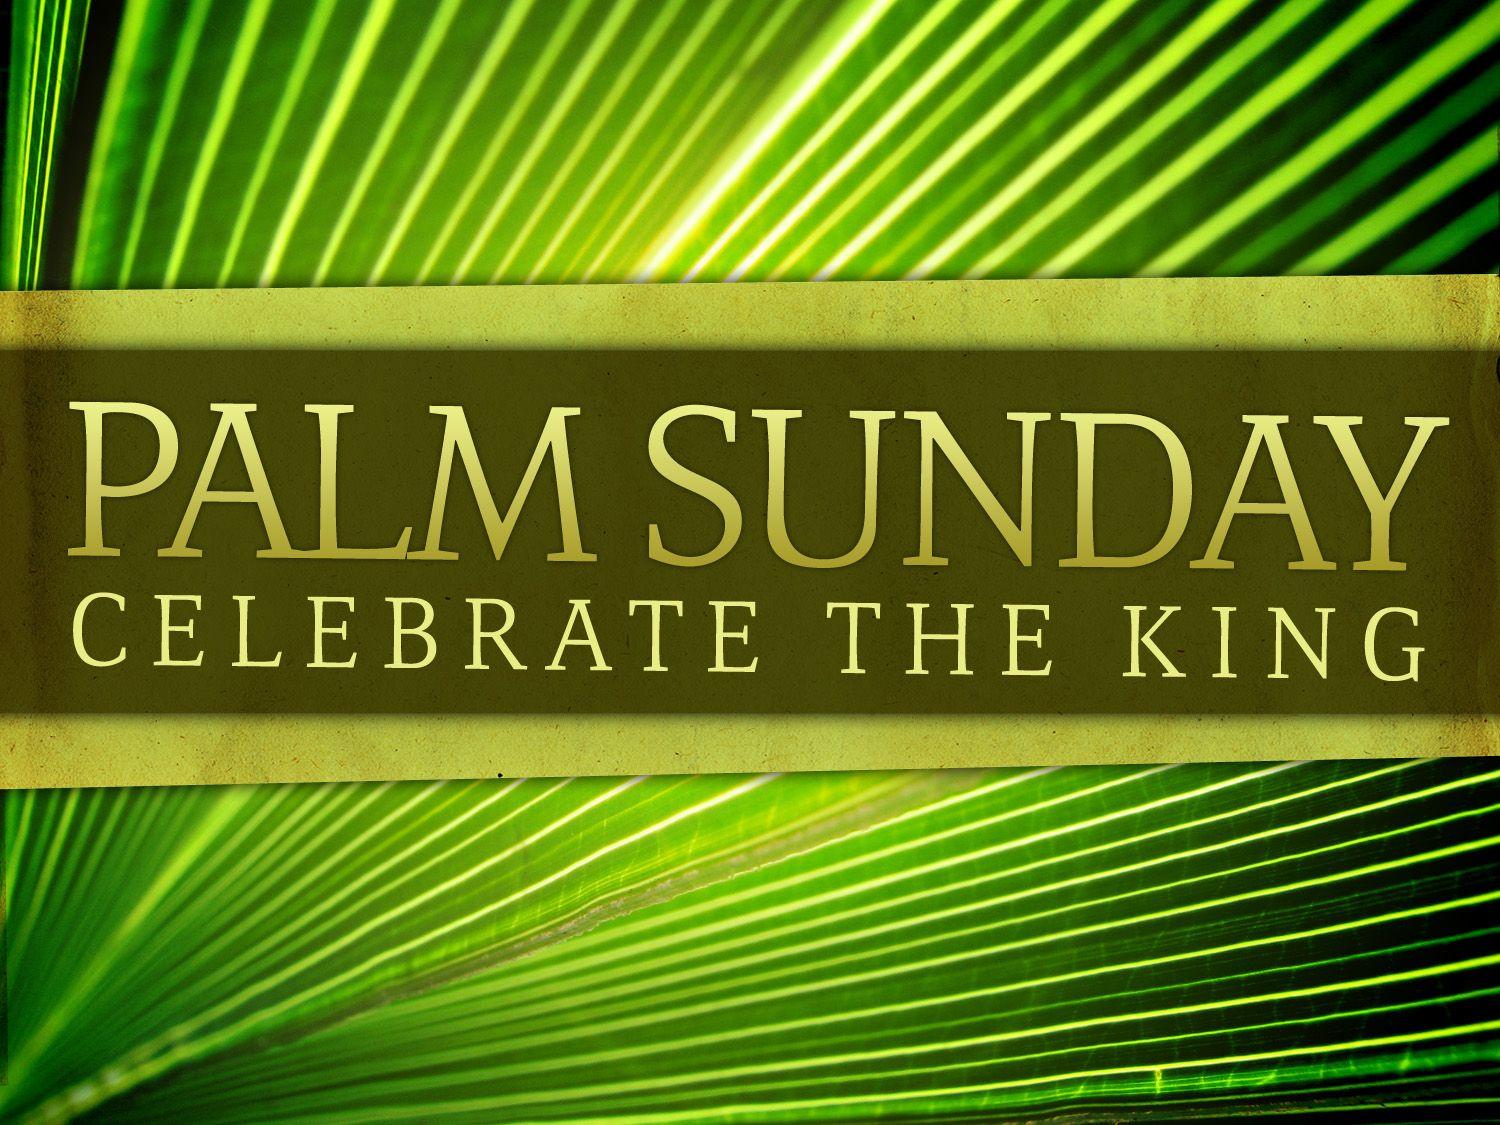 Palm Sunday Picture and Image. Happy Palm Sunday